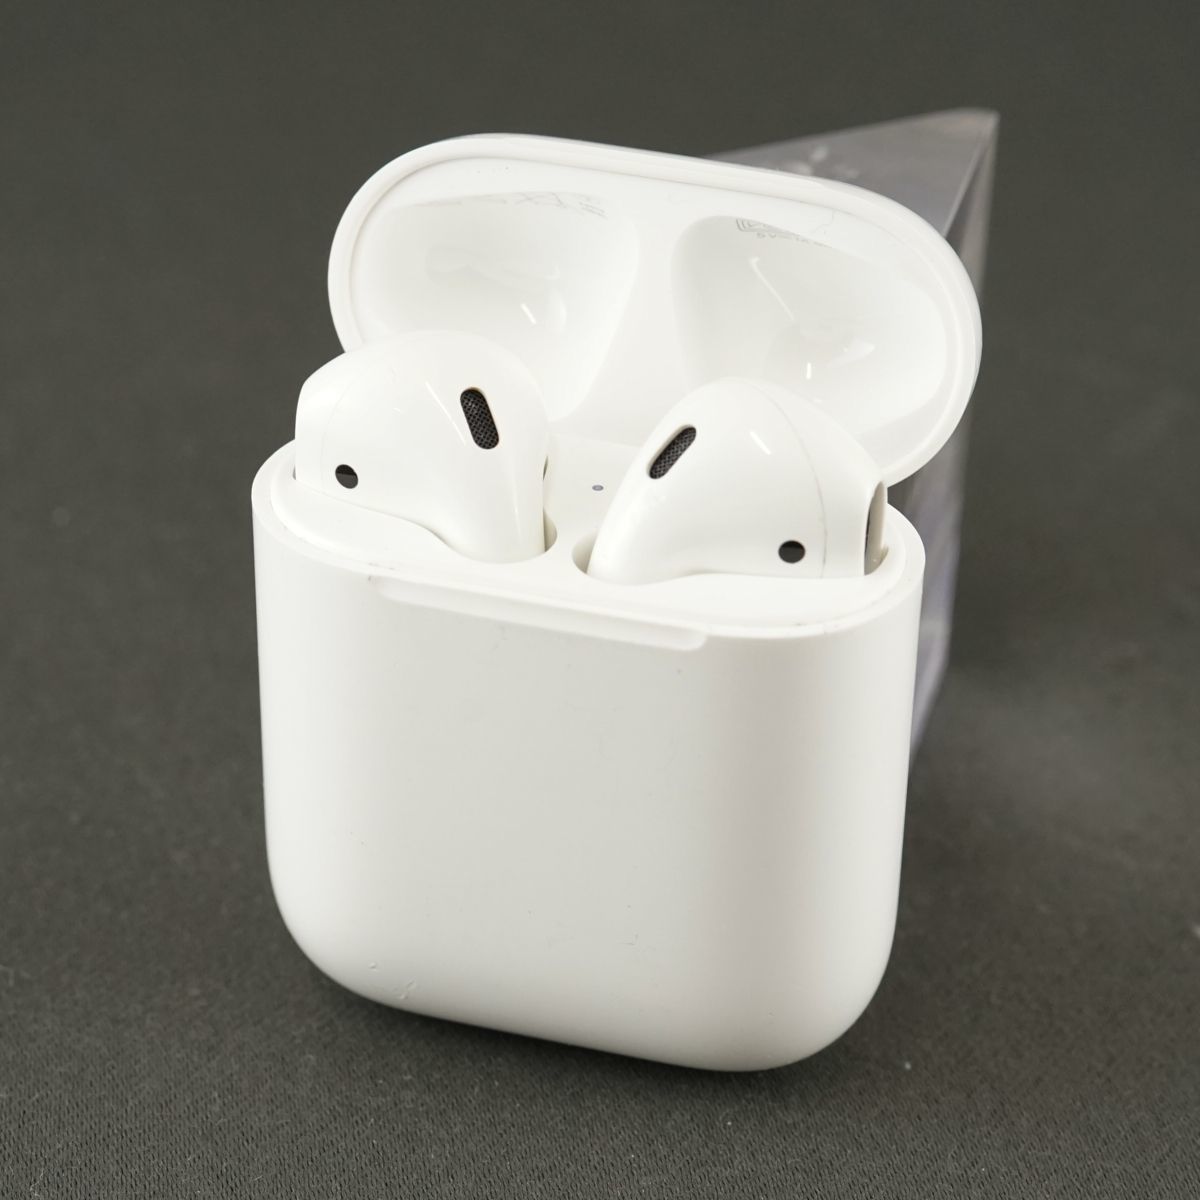 Apple AirPods with Charging Case エアーポッズ ワイヤレスイヤホン USED品 第二世代 Bluetooth MV7N2J/A 完動品 即日発送 T V8018